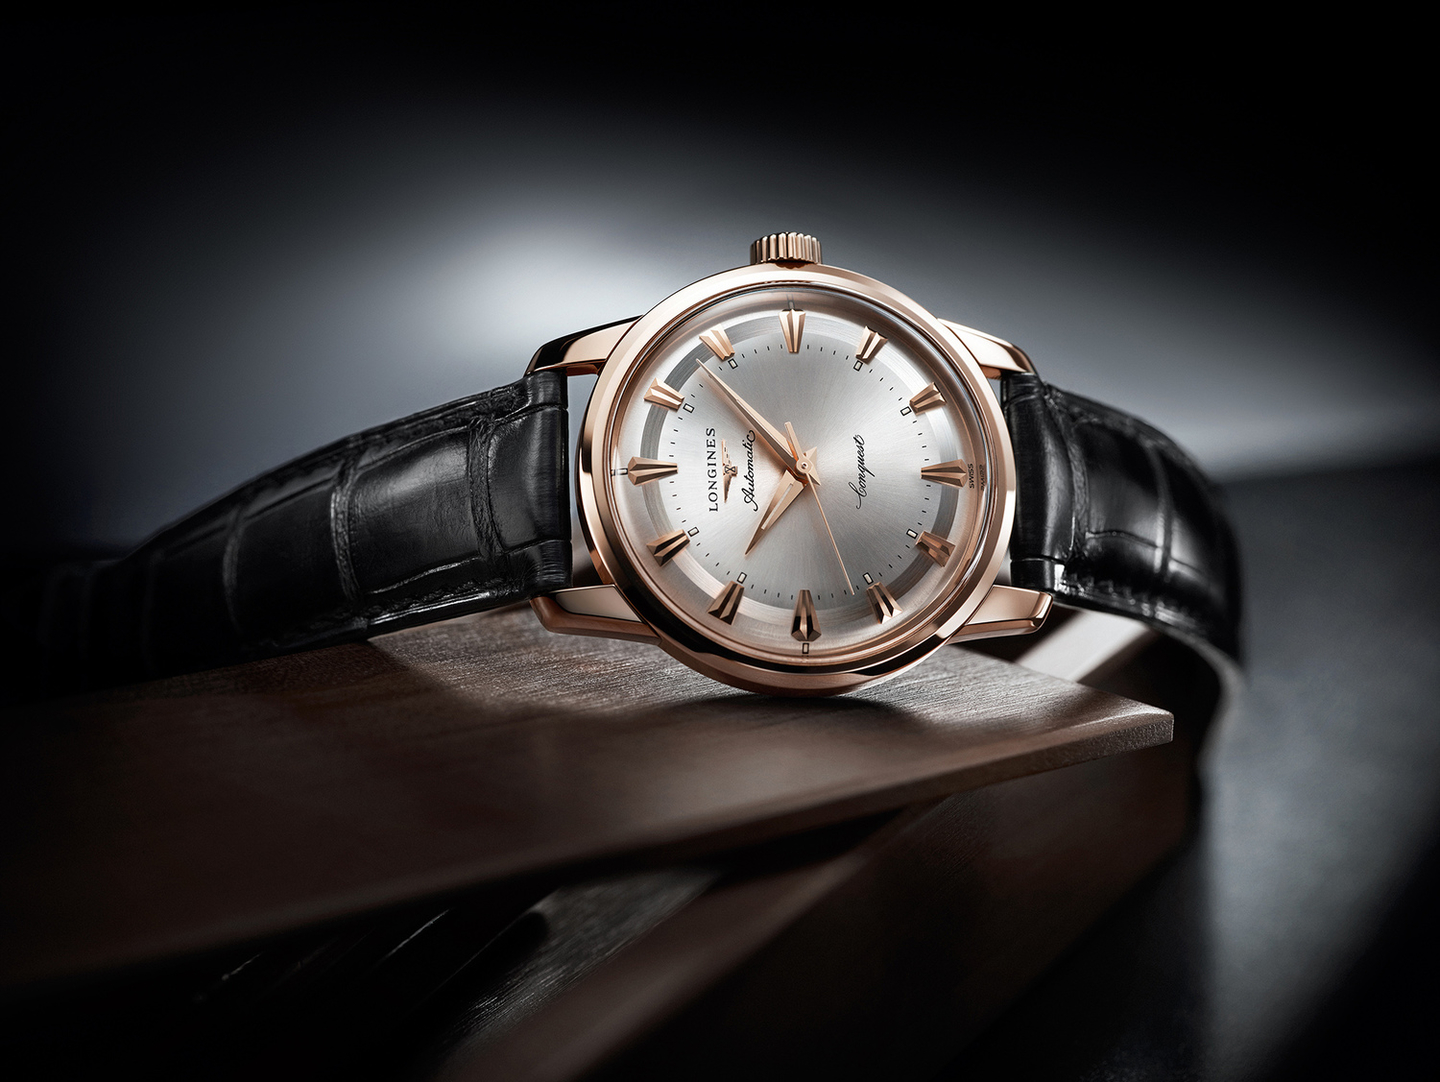 Introducing the Longines Conquest Heritage 1954-2014